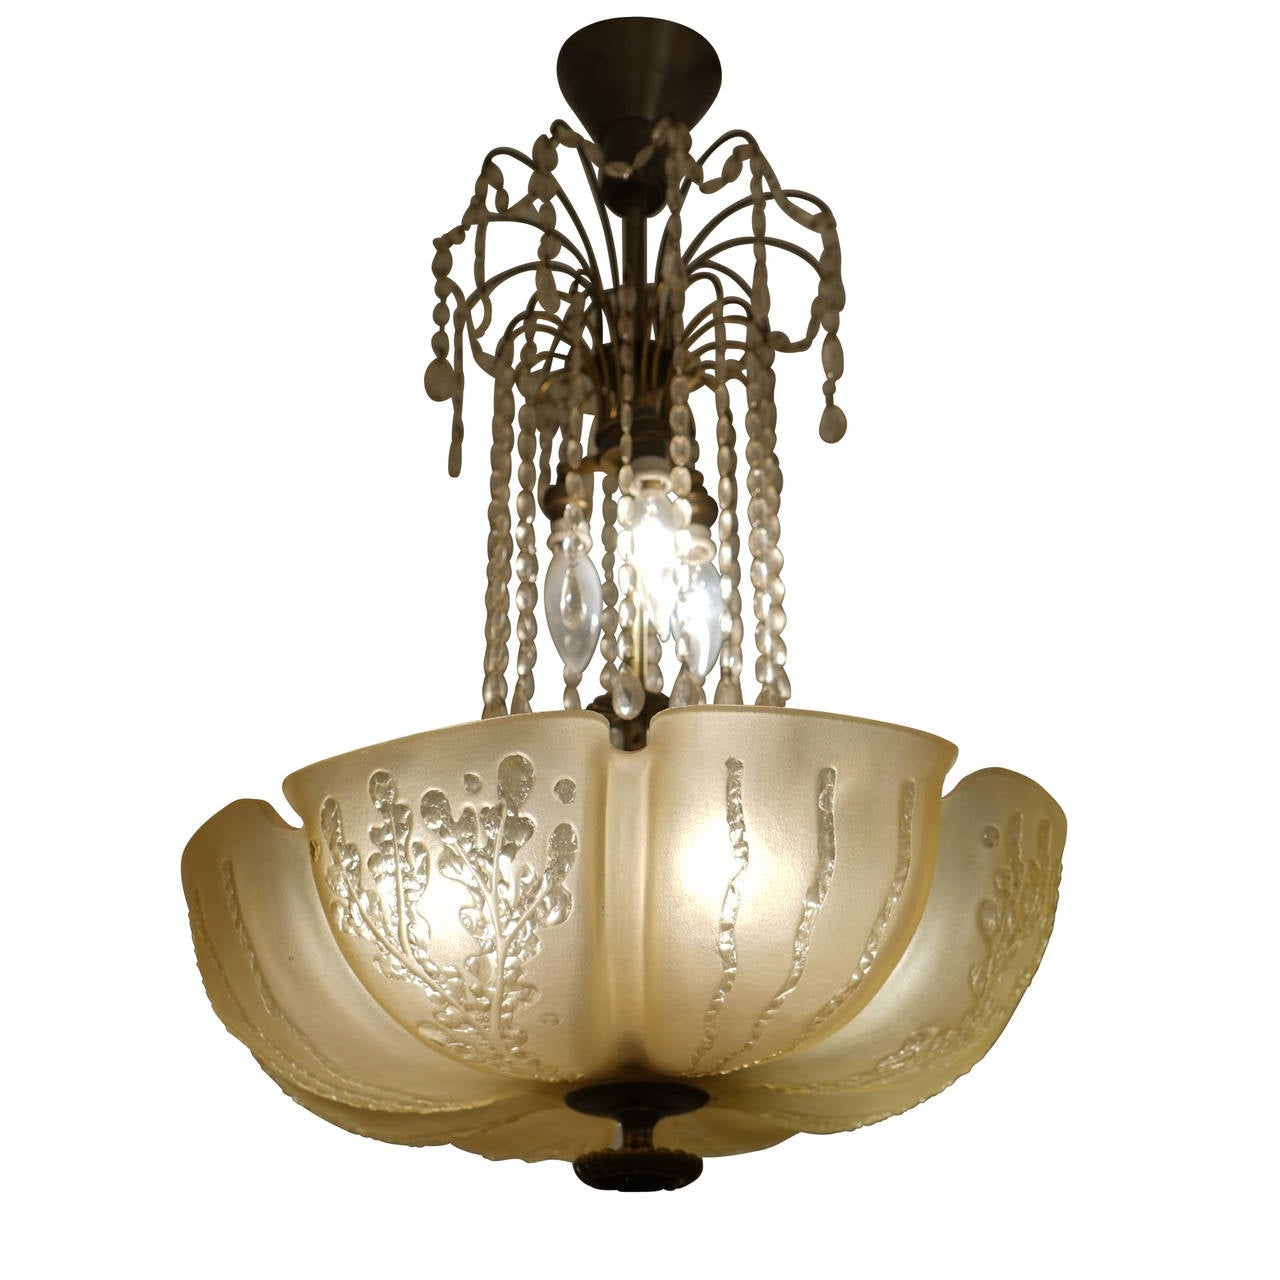 Dripping with crystals, this chandelier is iconic of the decadence of the roaring twenties. A golden blossom with stylized plants and grasses adorning the petals and a waterfall of cascading crystals glitter in the reflection of 7 light bulbs. 